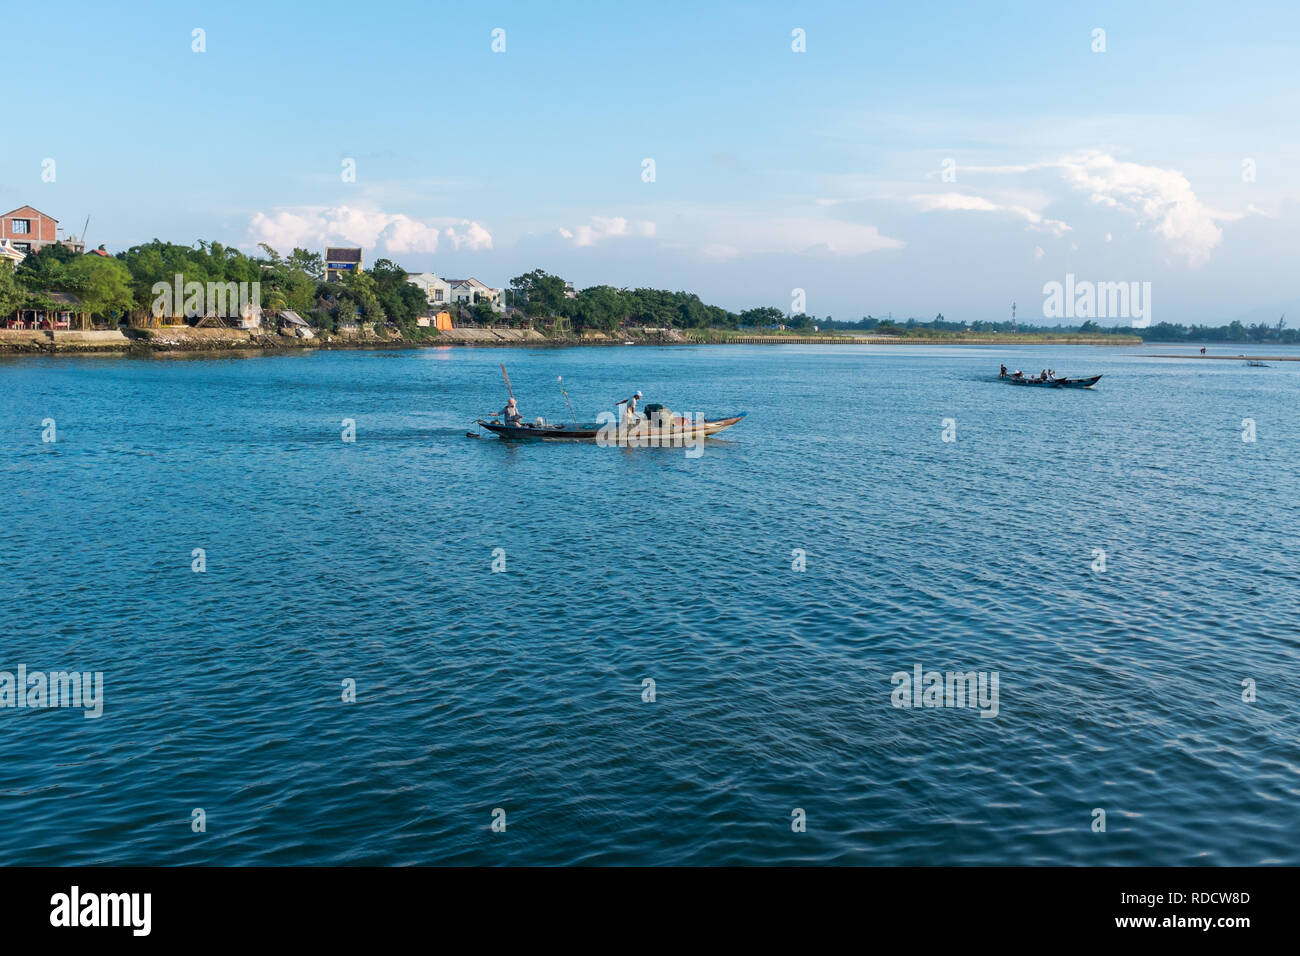 Small fishing boats on the Thu Bon River in the Vietnamese city of Hoi An in Quang Nam Province Stock Photo